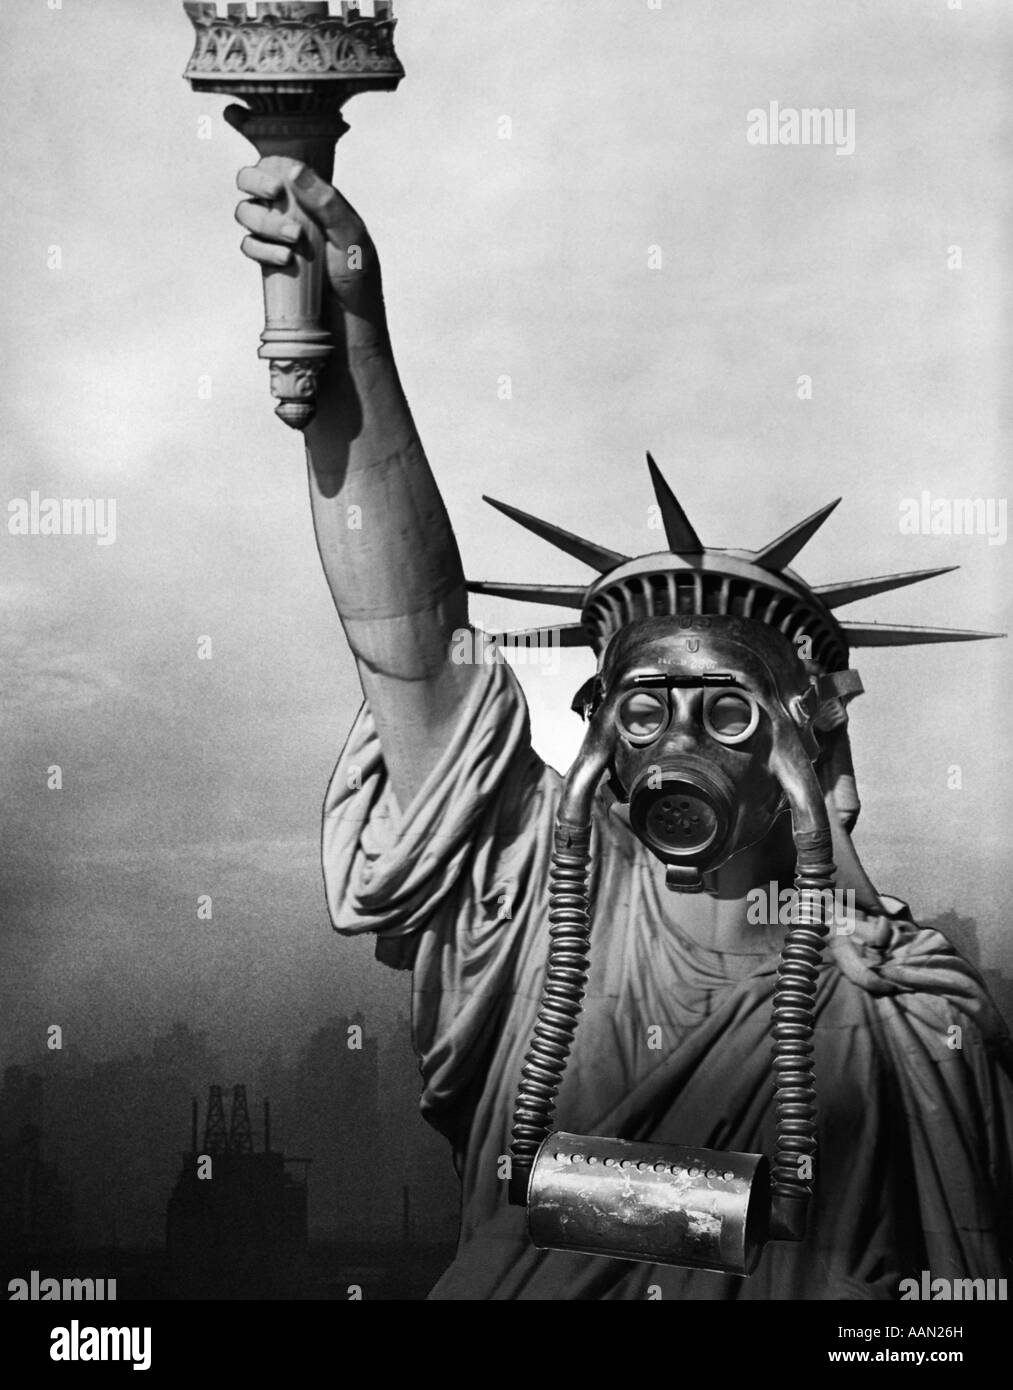 1970s STATUE OF LIBERTY WEARING GAS MASK WITH POLLUTED CITY SKYLINE IN BACKGROUND Stock Photo